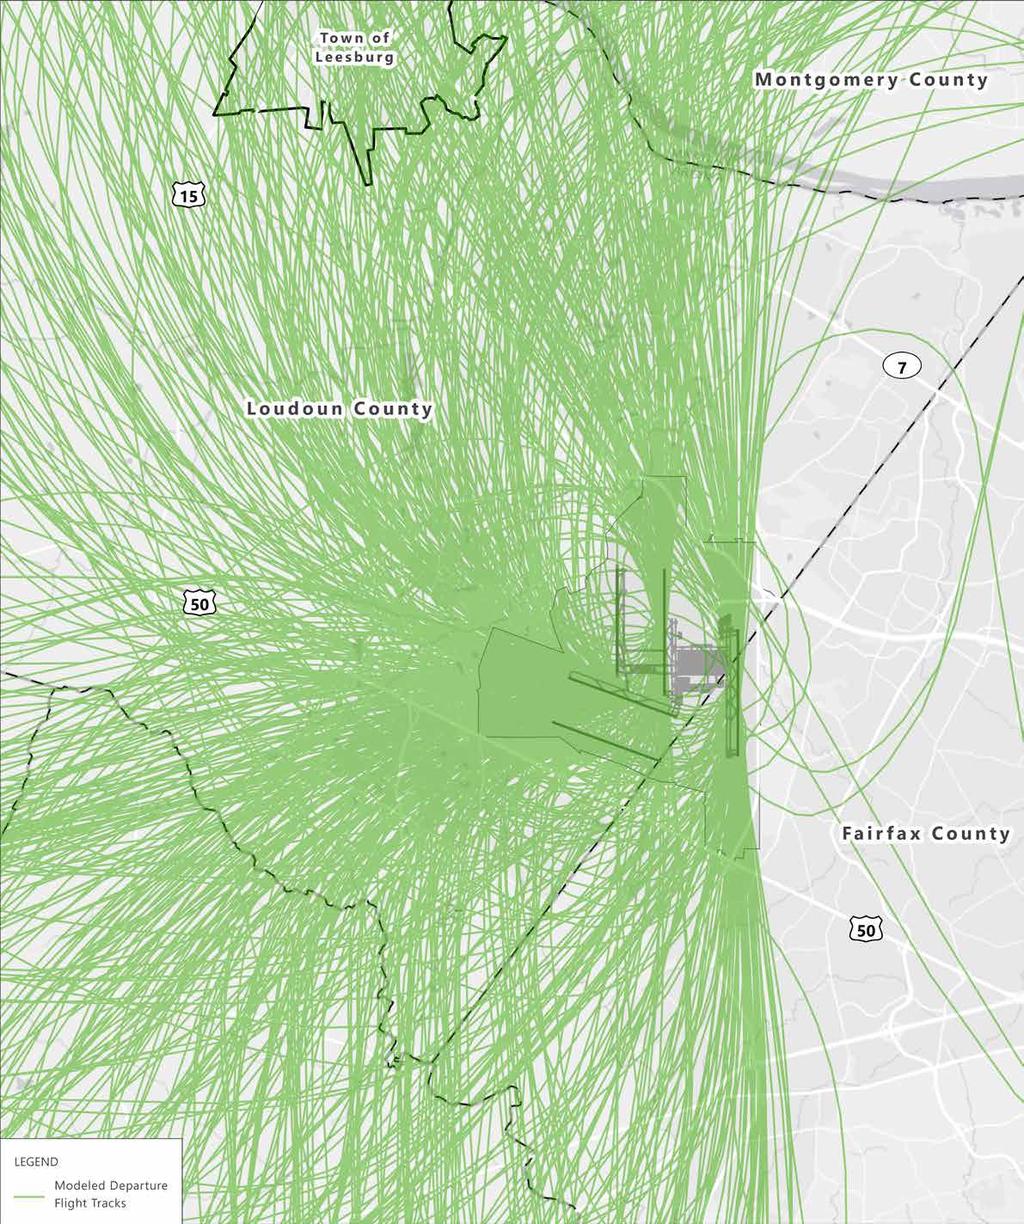 Five-Runway Airfield Noise Model Tracks Arrival Flight Paths Departure Flight Paths SOURCES: Esri, HERE, DeLorme, MapmyIndia, OpenStreetMap Contributors, and the GIS User